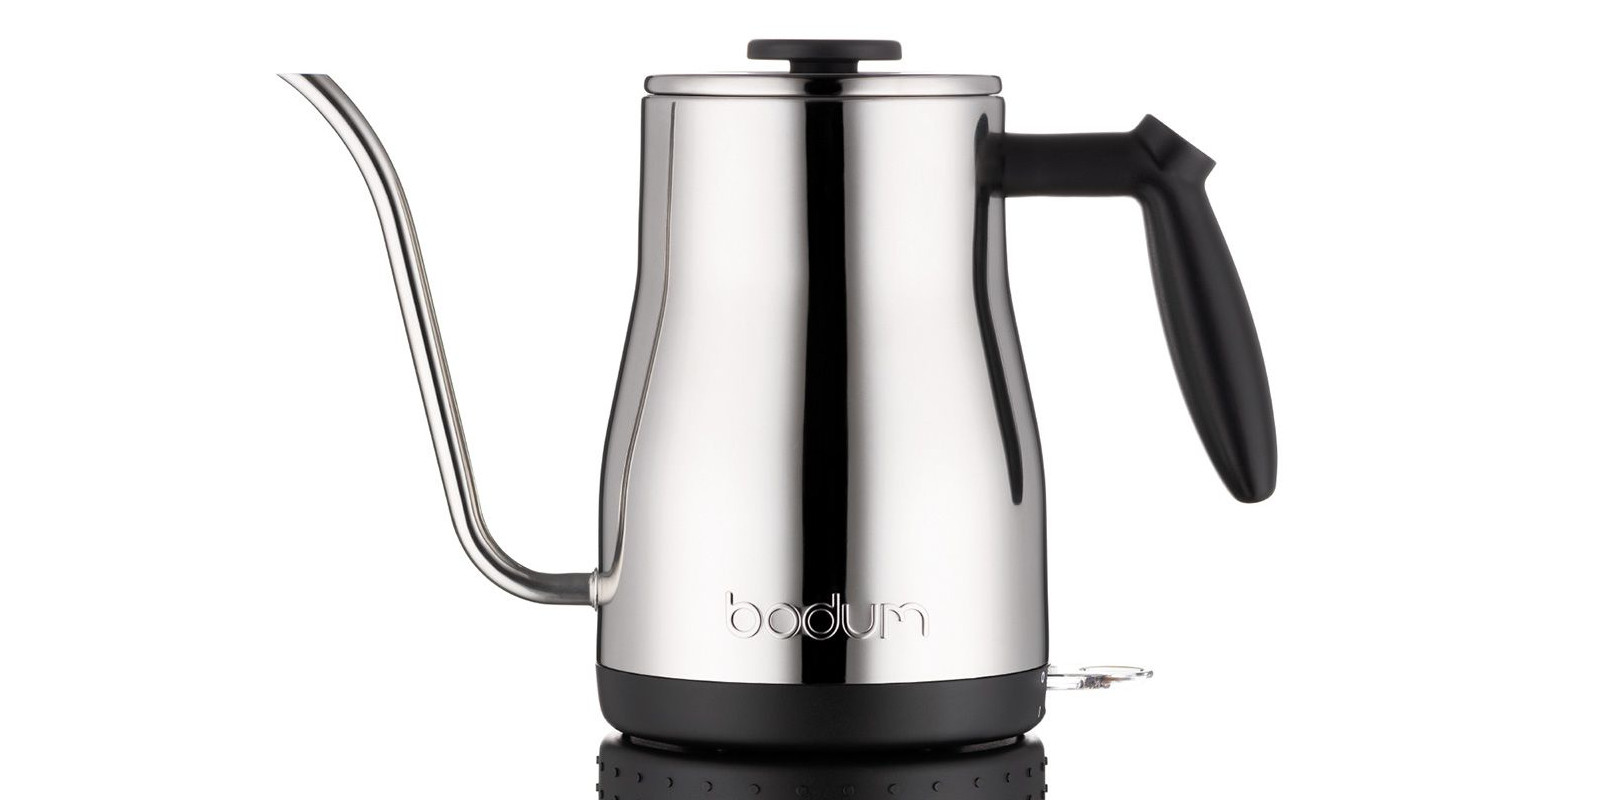 Bodum Bistro Electric Water Kettle , 34 Ounce, White 